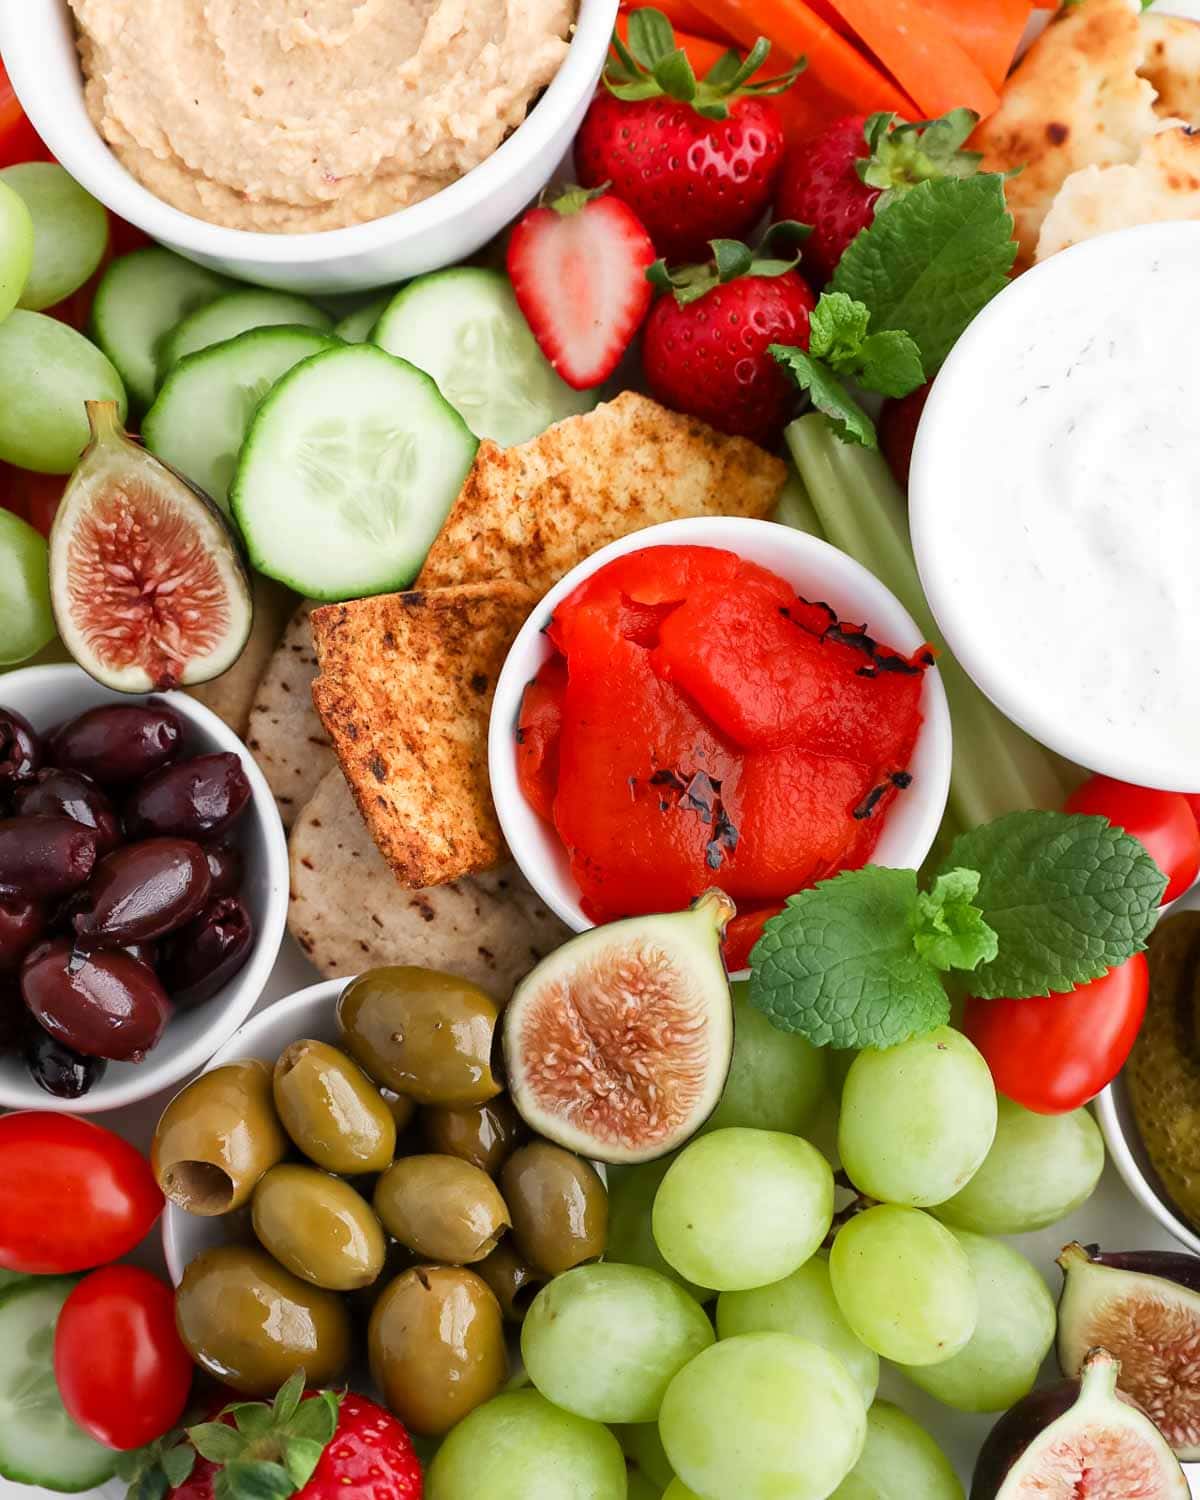 Hummus, tzatziki, peppers, olives, cucumbers, strawberries, figs, mint leaves, tomatoes.